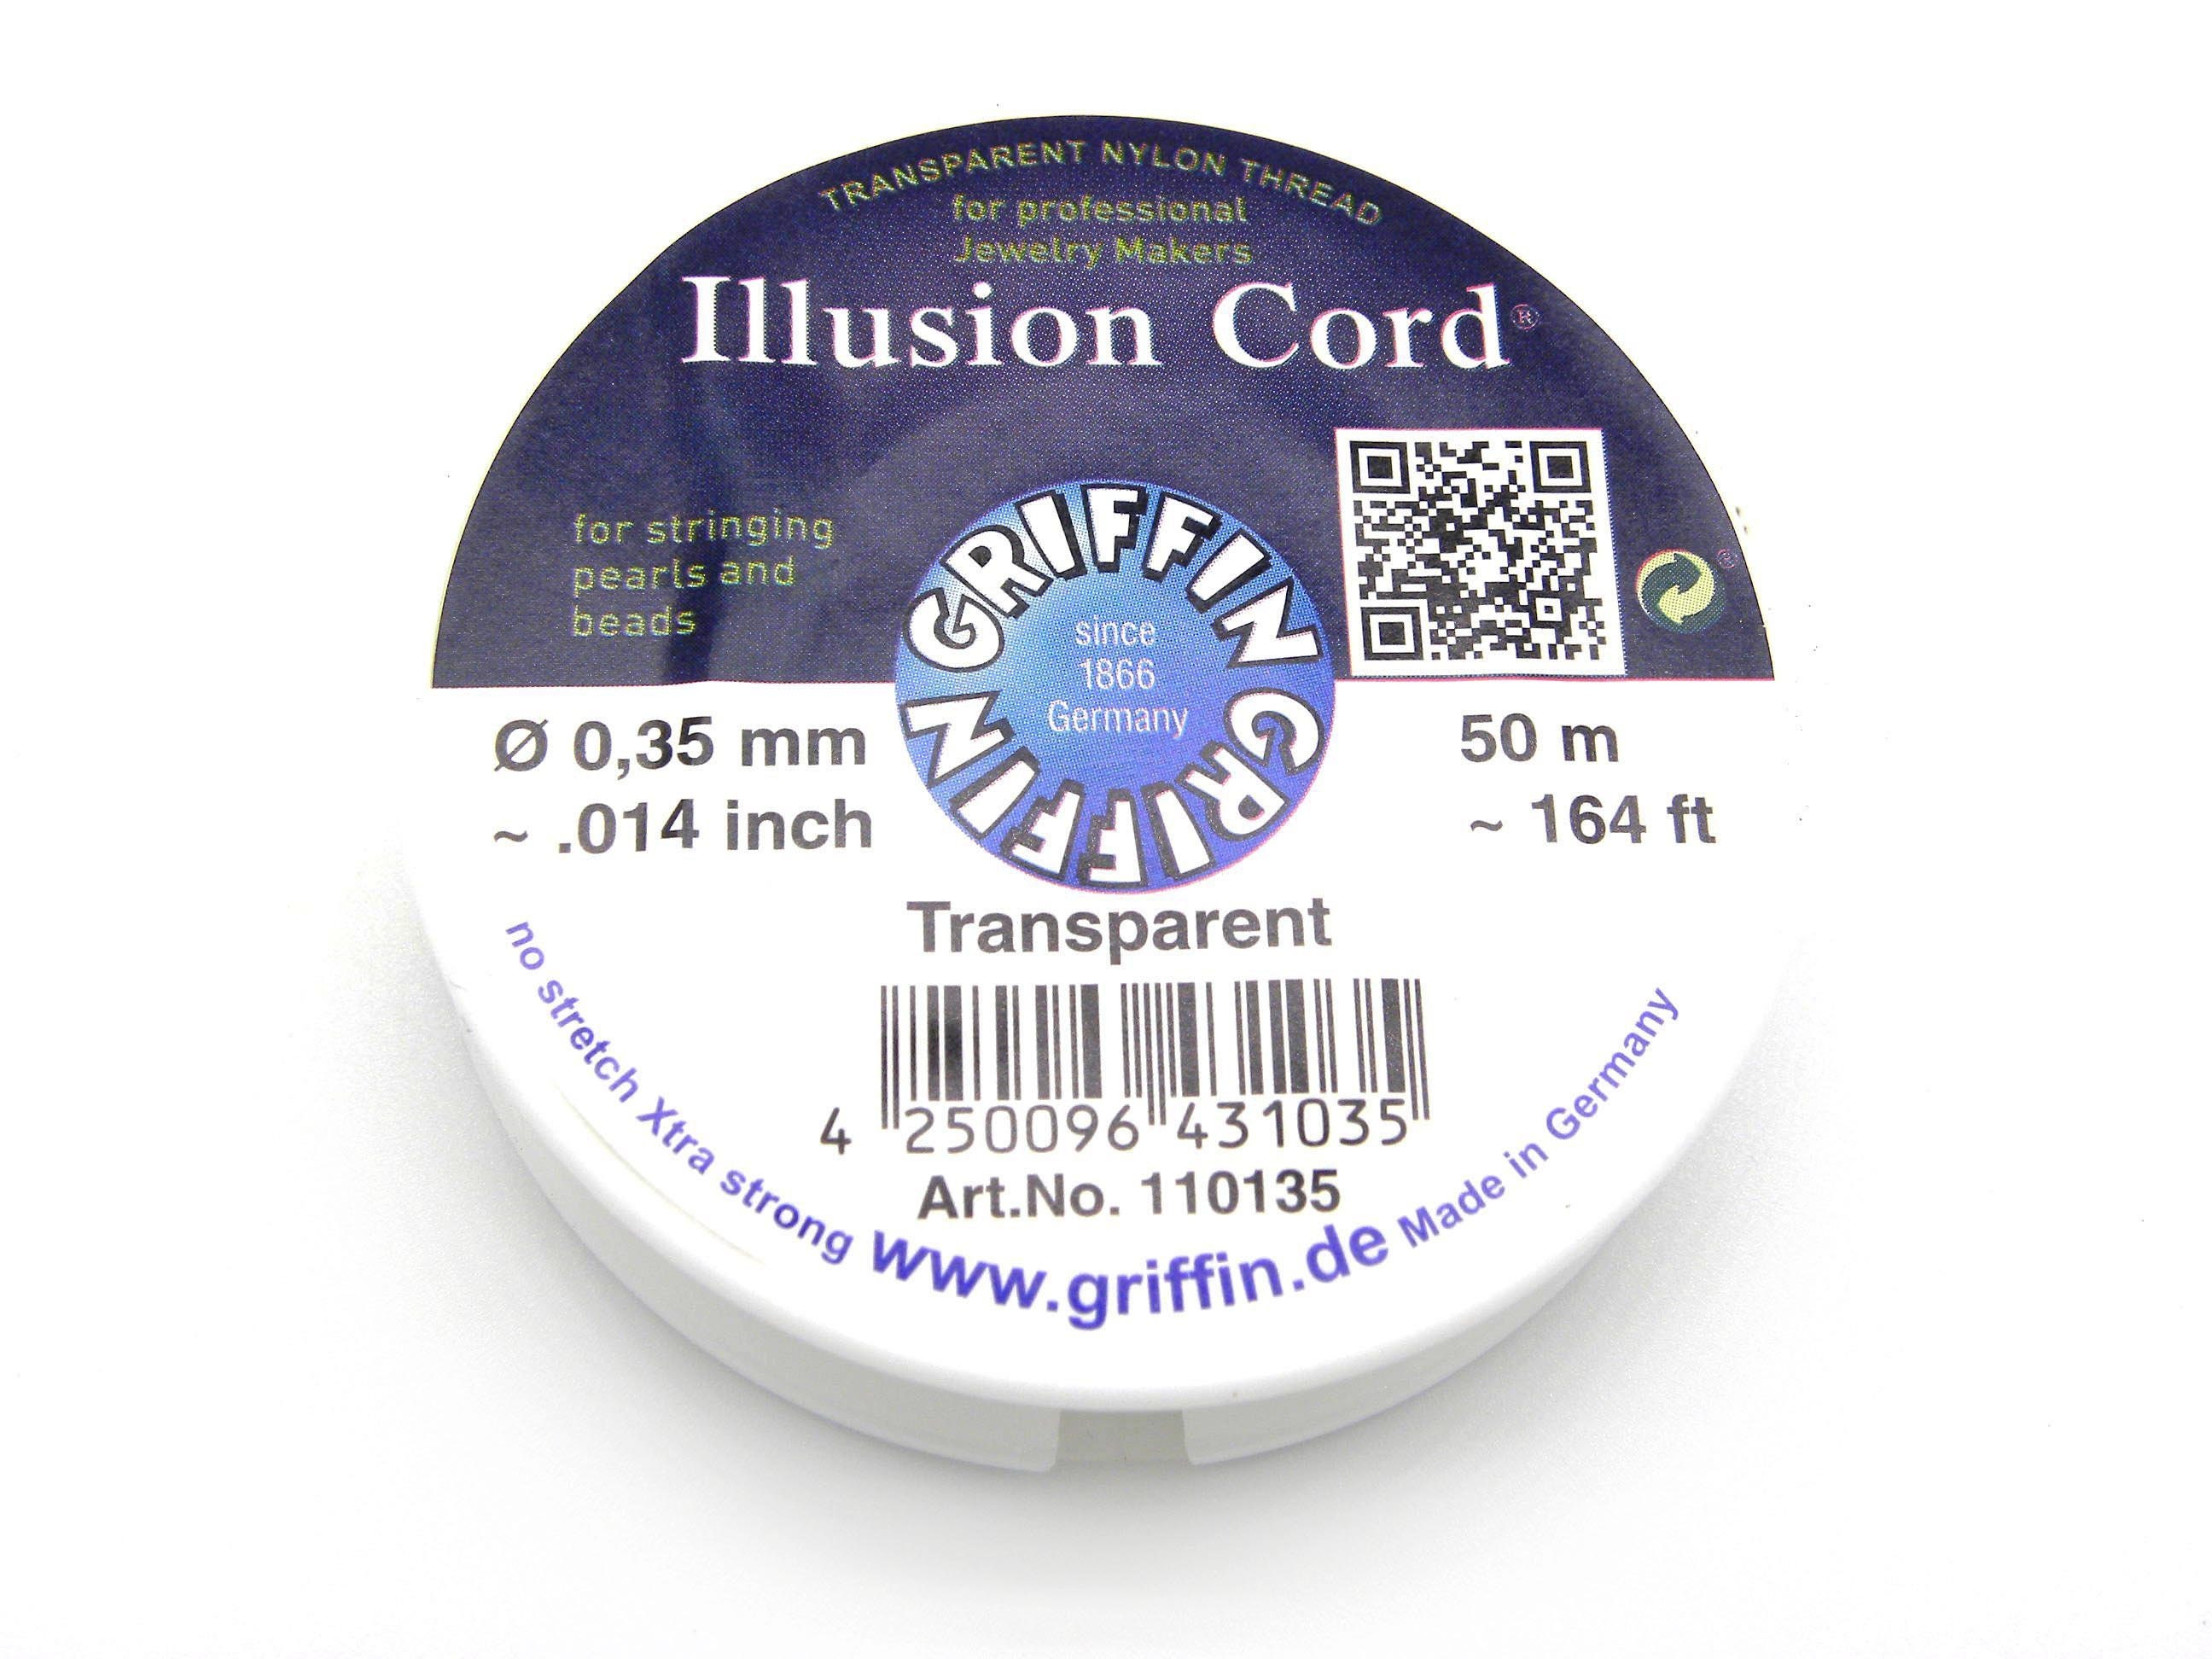 0.35 Mm .014 Inch Griffin Illusion Cord Beading Thread Transparent Nylon  Line for Jewellery-making 50 M 164 Ft 